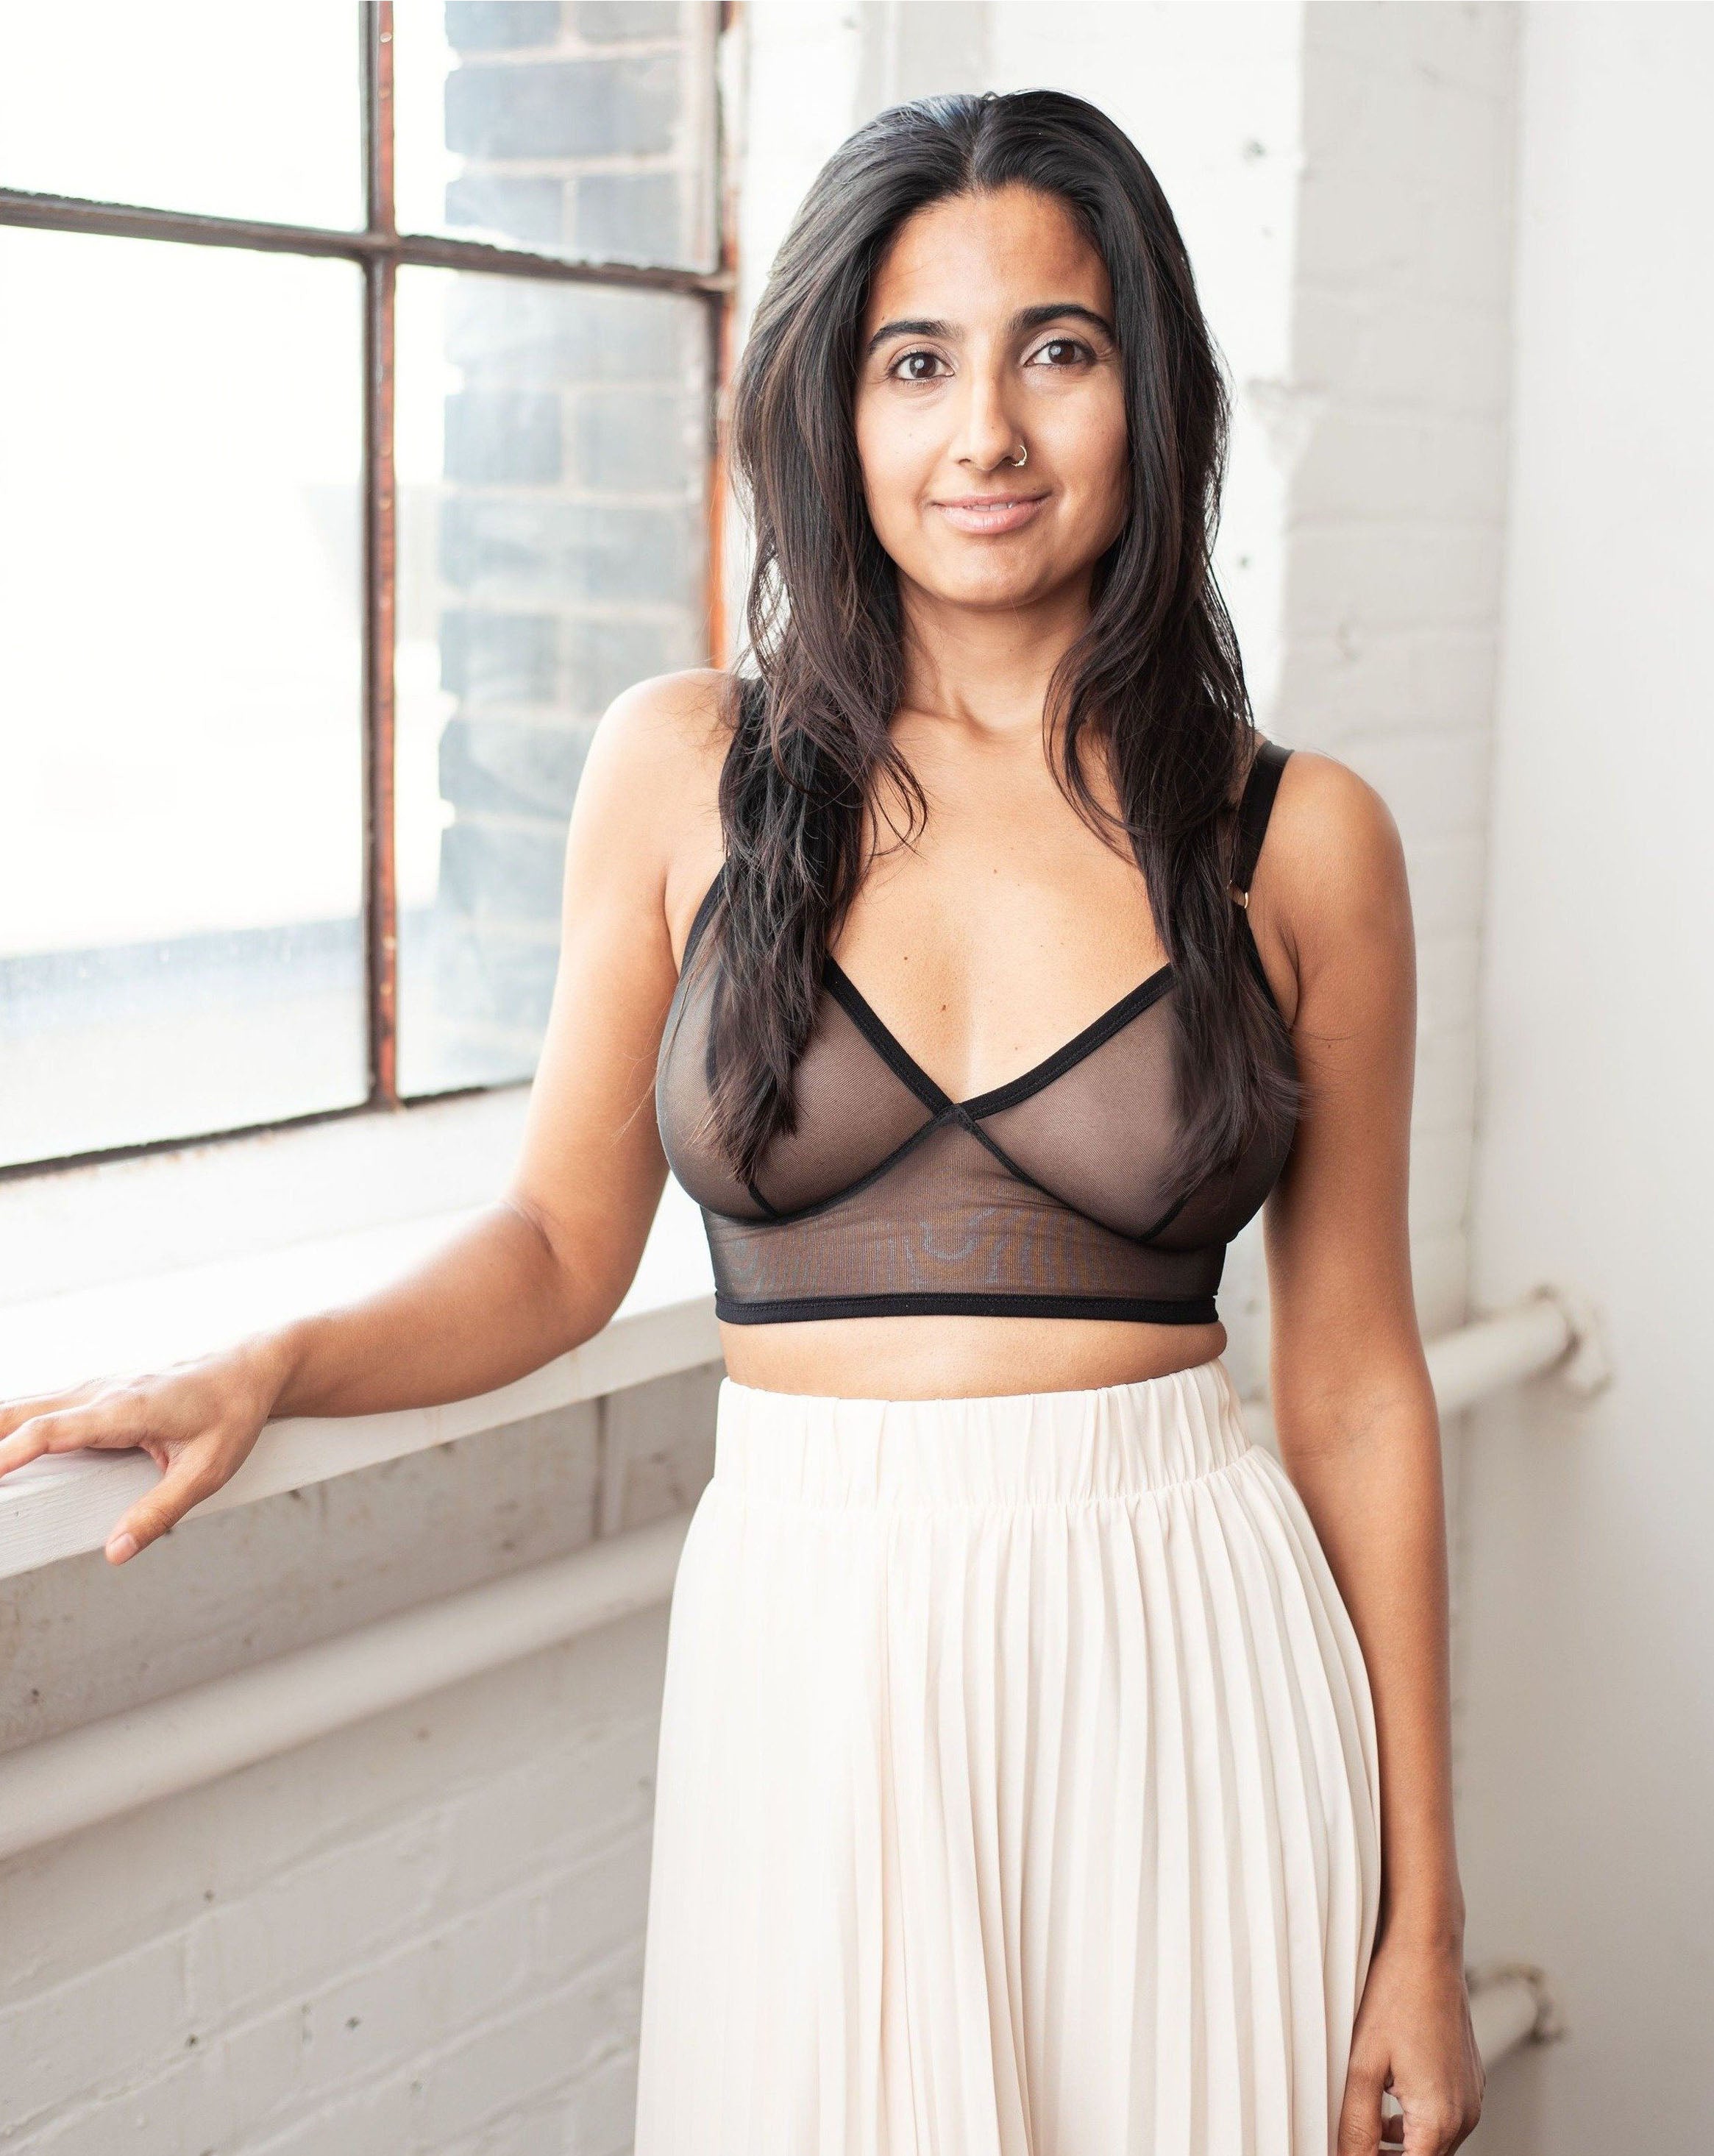 Ruhee with Rubies Bras, a female with long black hair wearing a black sheer wirefree bra with a low v neckline. Full front body shot on white brick back drop with a window.